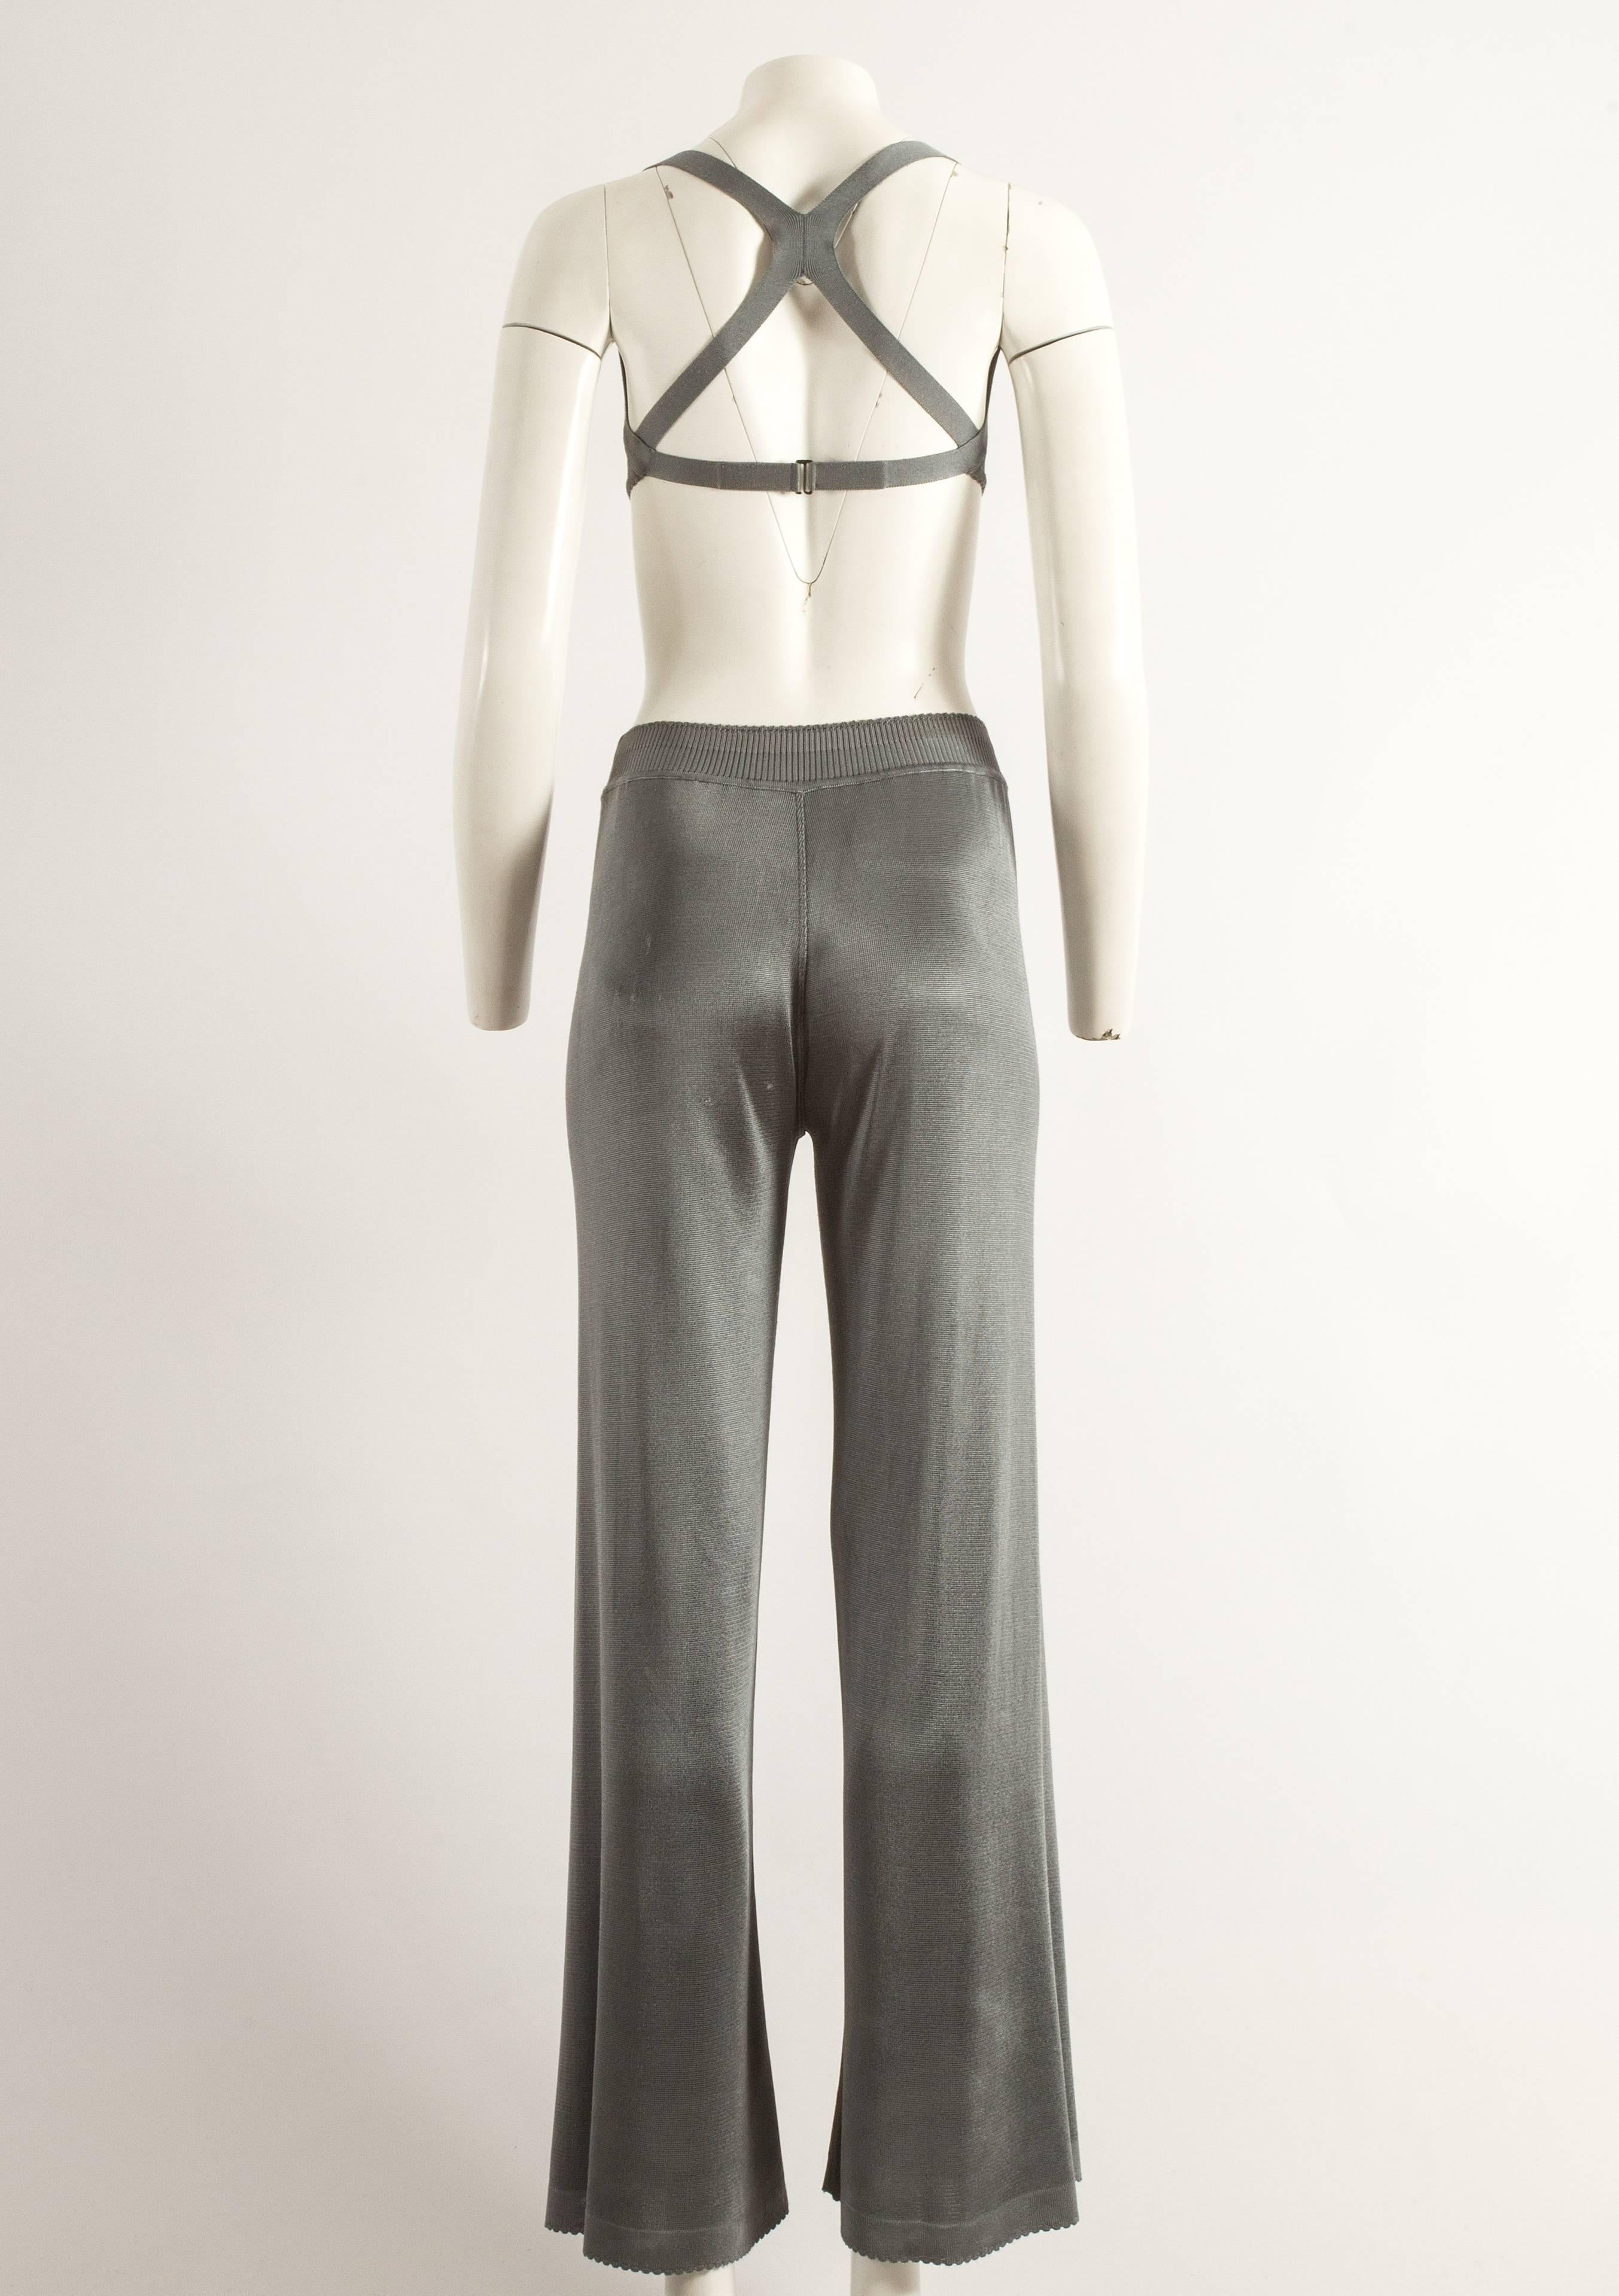 Azzedine Alaia Spring-Summer 1993 grey acetate knitted bra and pants ensemble  1